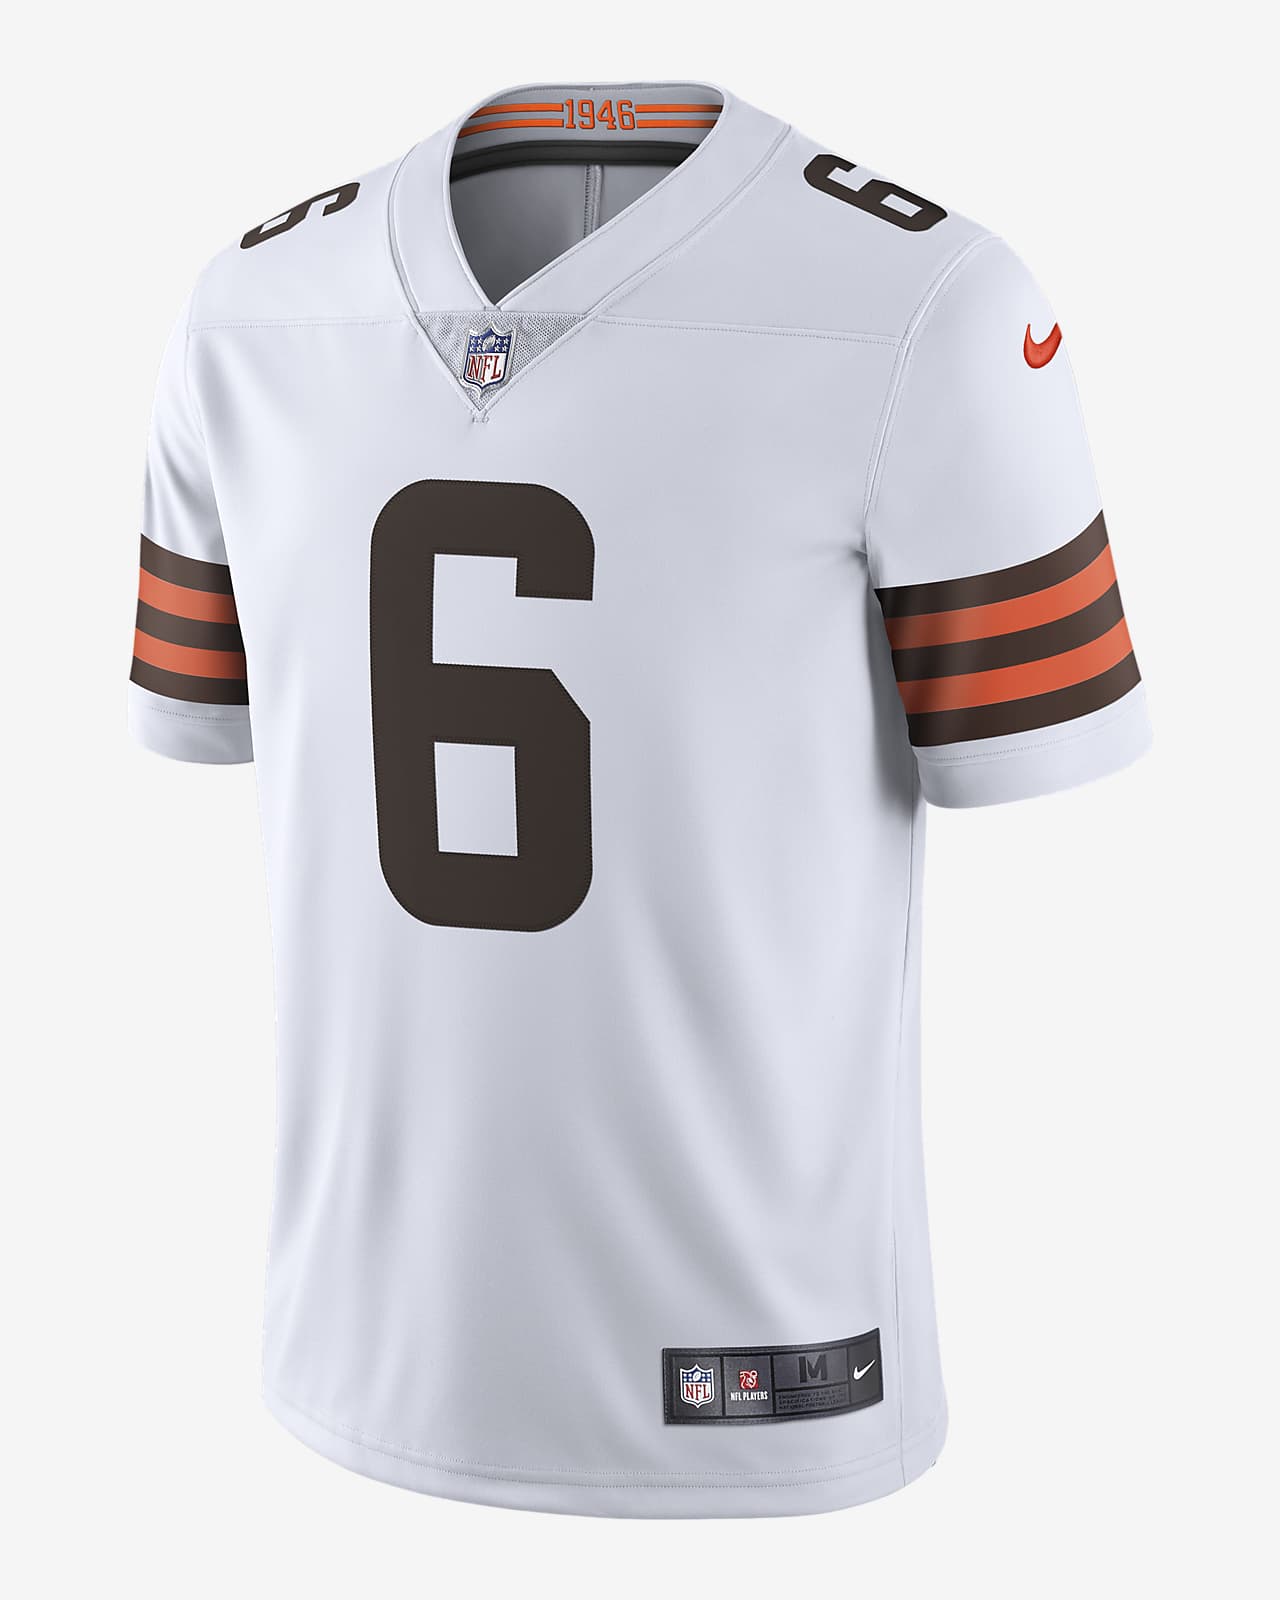 cleveland browns nike